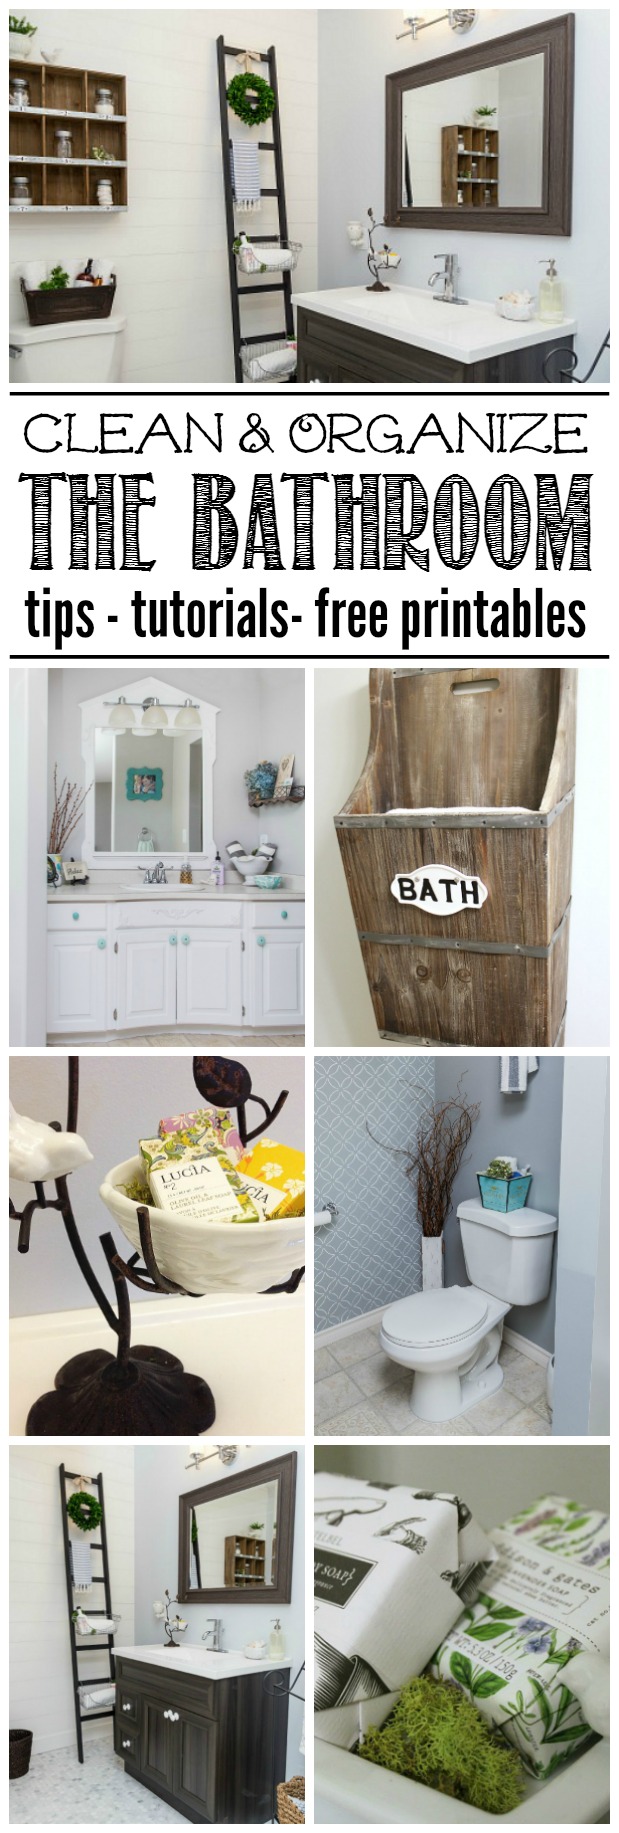 https://www.cleanandscentsible.com/wp-content/uploads/2016/03/Bathroom-Cleaning-and-Organization-Ideas.jpg